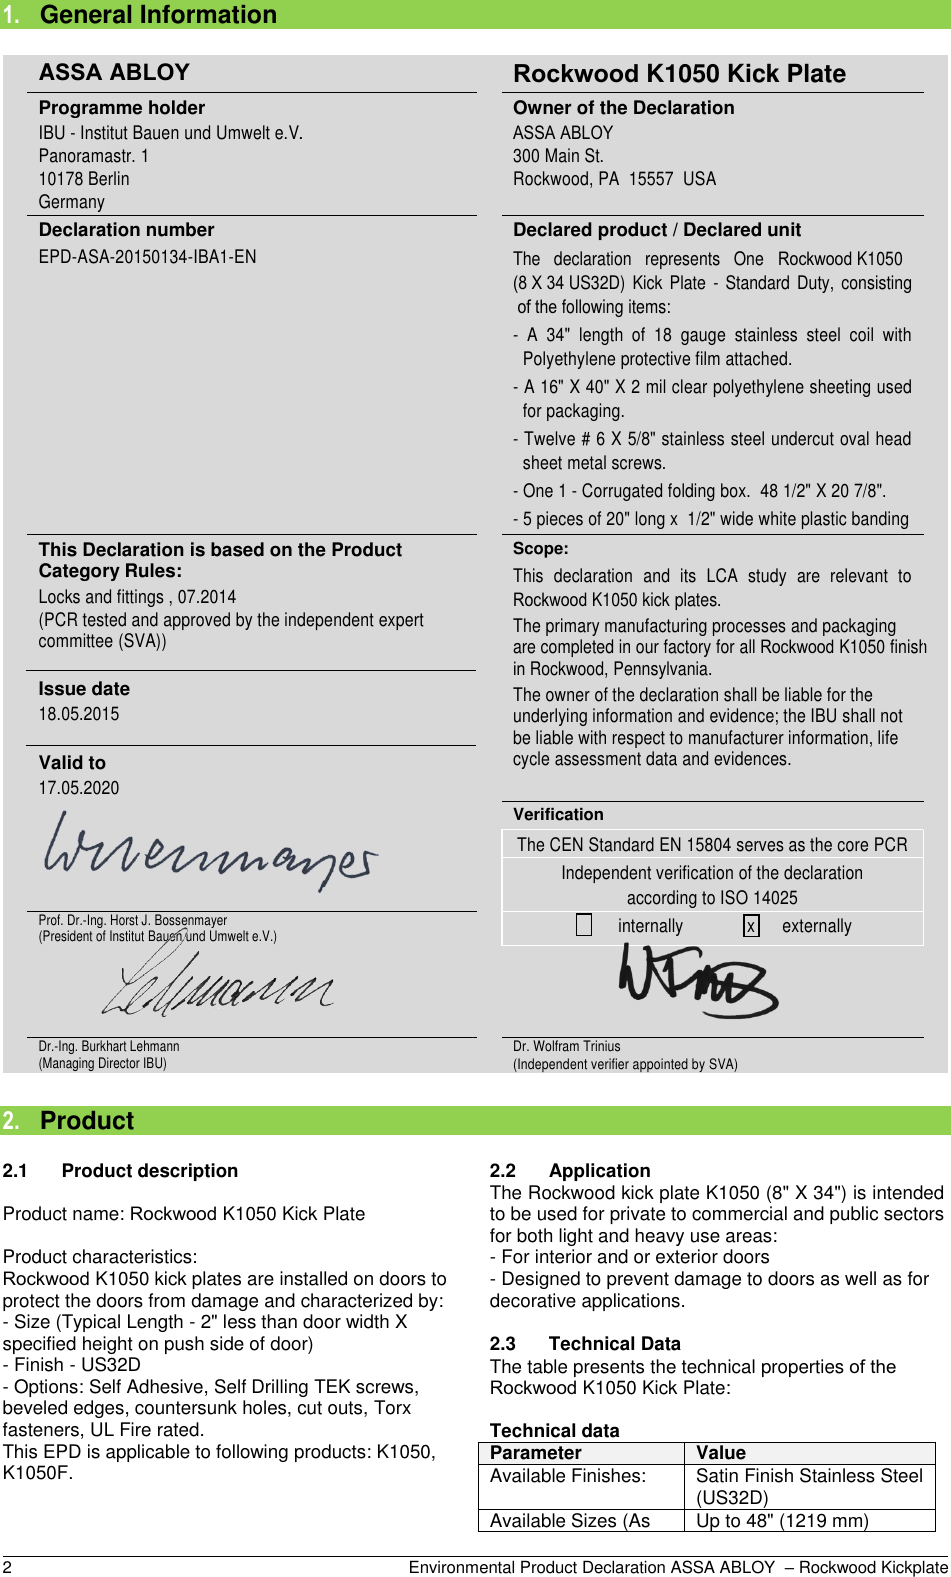 Page 2 of 9 - Rockwood  K1050 Kick Plate - Environmental Product Declaration (EPD) EPD